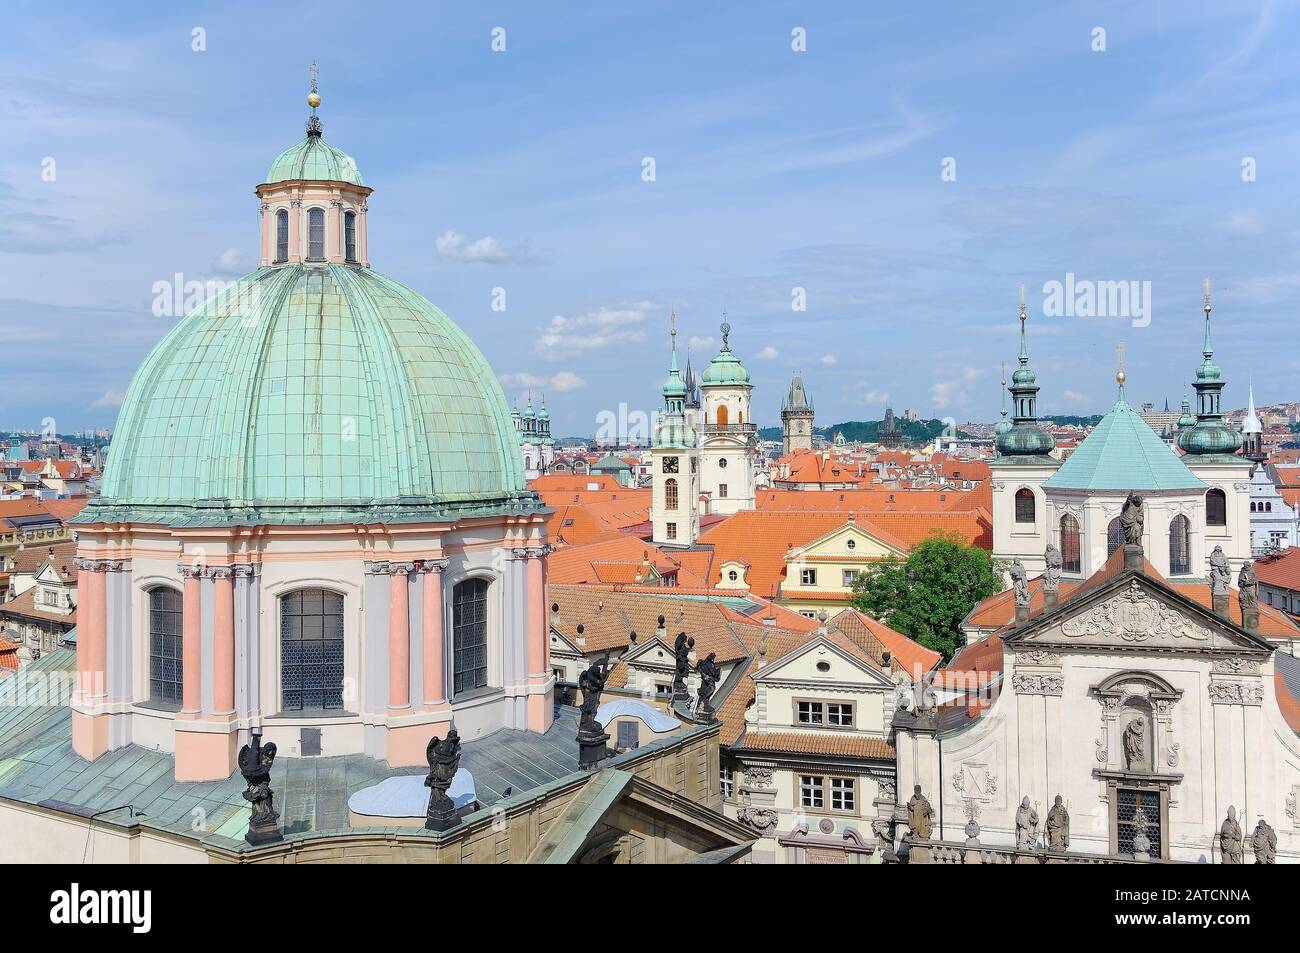 Historic Domes at Old Town quarter of Prague,capital of the Czech Republic. It is located between Wenceslas Square & Charles Bridge Stock Photo